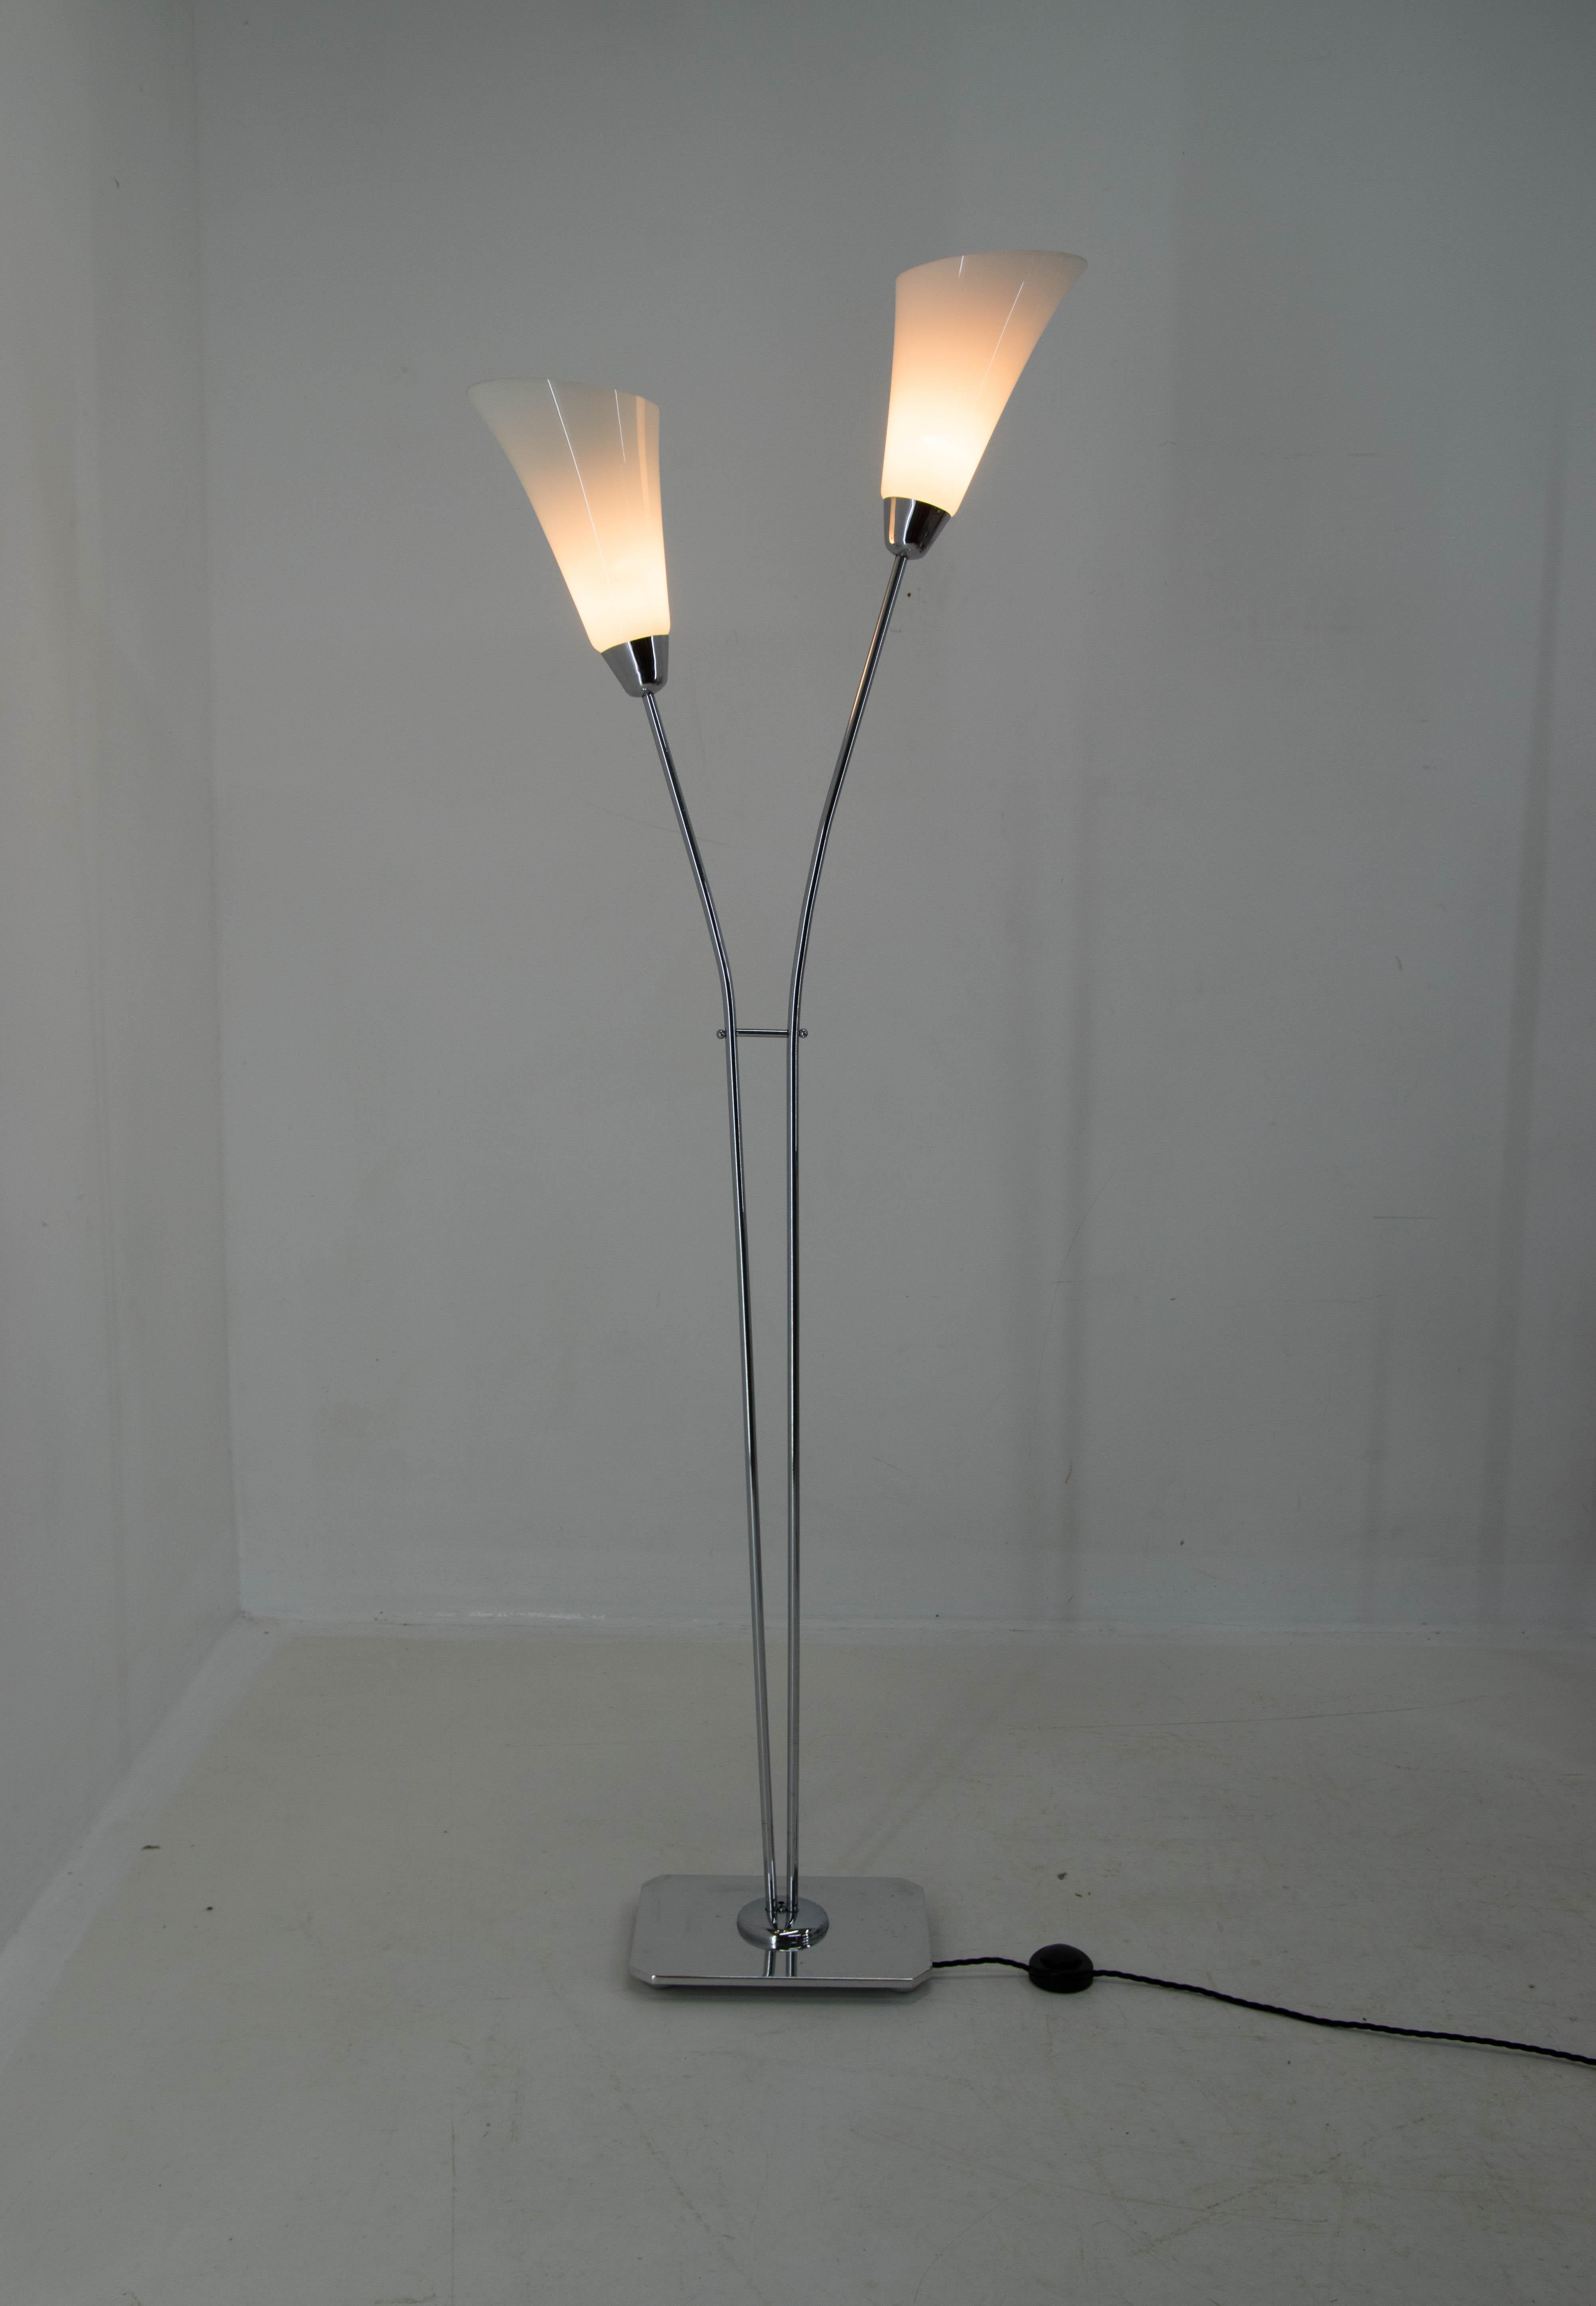 Art Deco floor lamp with two opaline glass shades.
Chrome polished.
Rewired: 2x40W, E25-E27 bulb
New foot switch.
US plug adapter included.